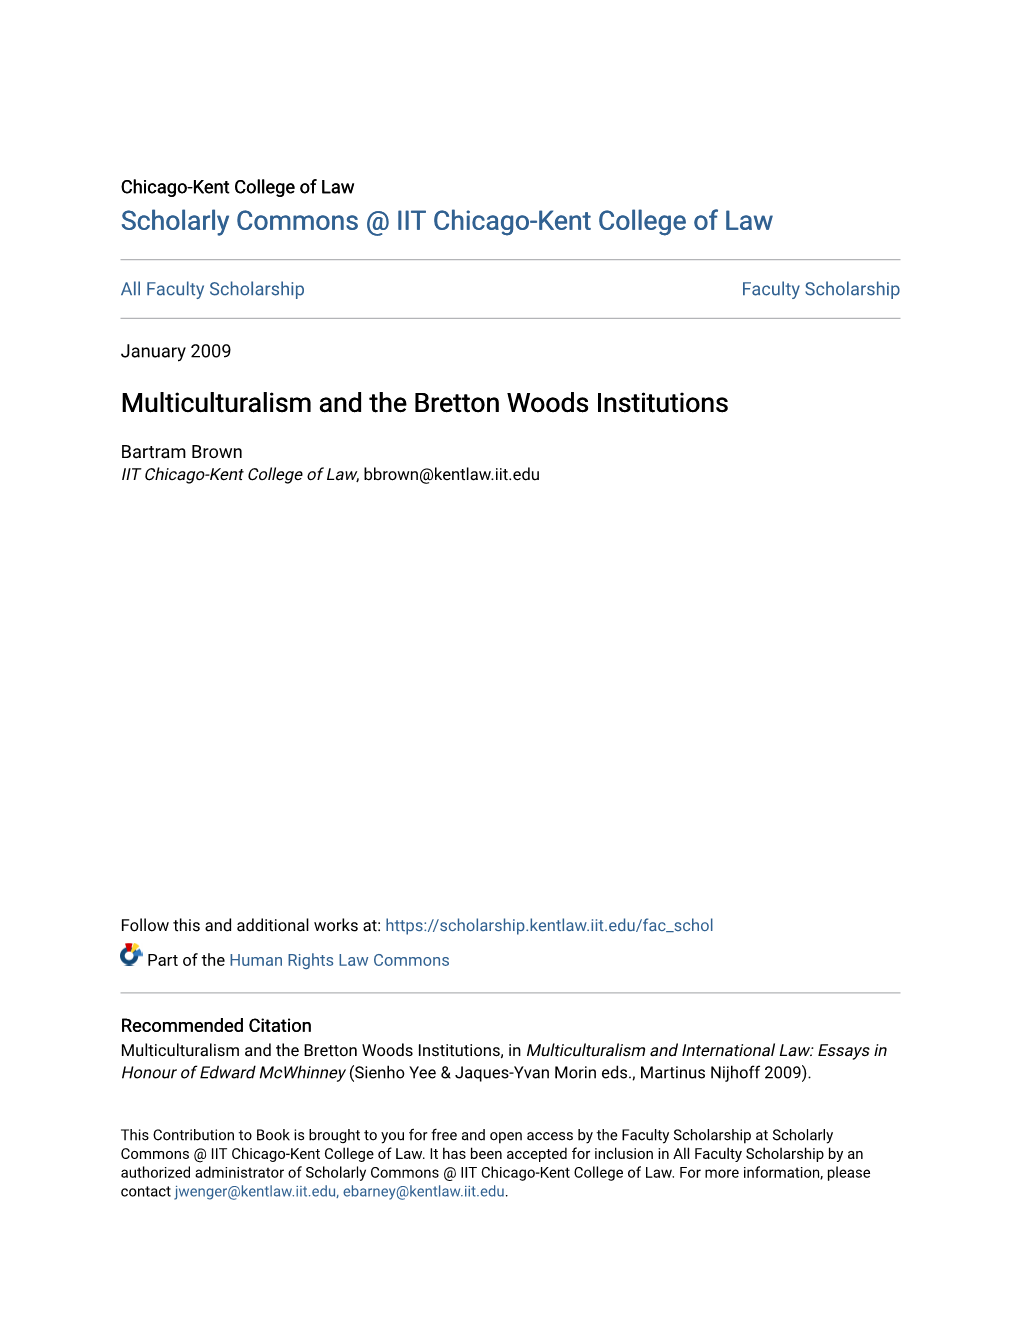 Multiculturalism and the Bretton Woods Institutions